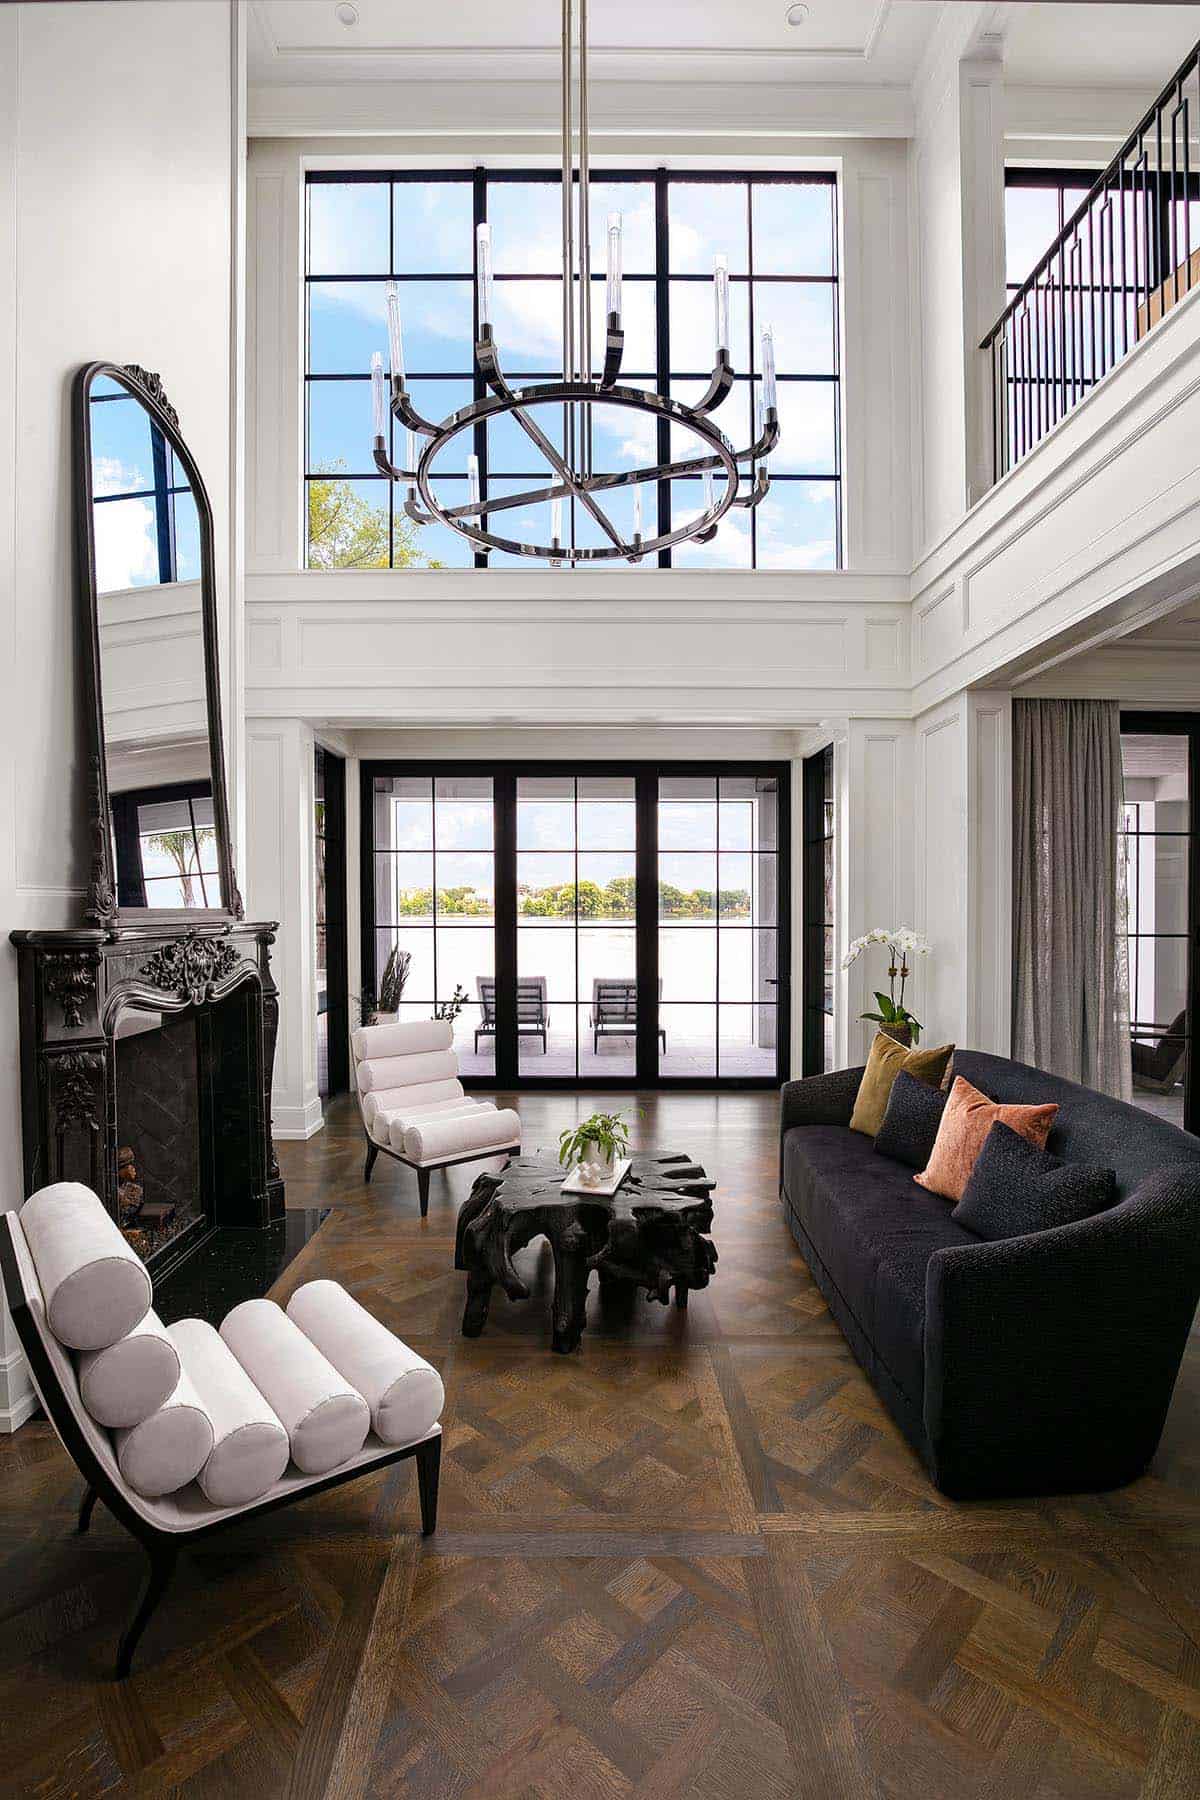 transitional style double volume living room